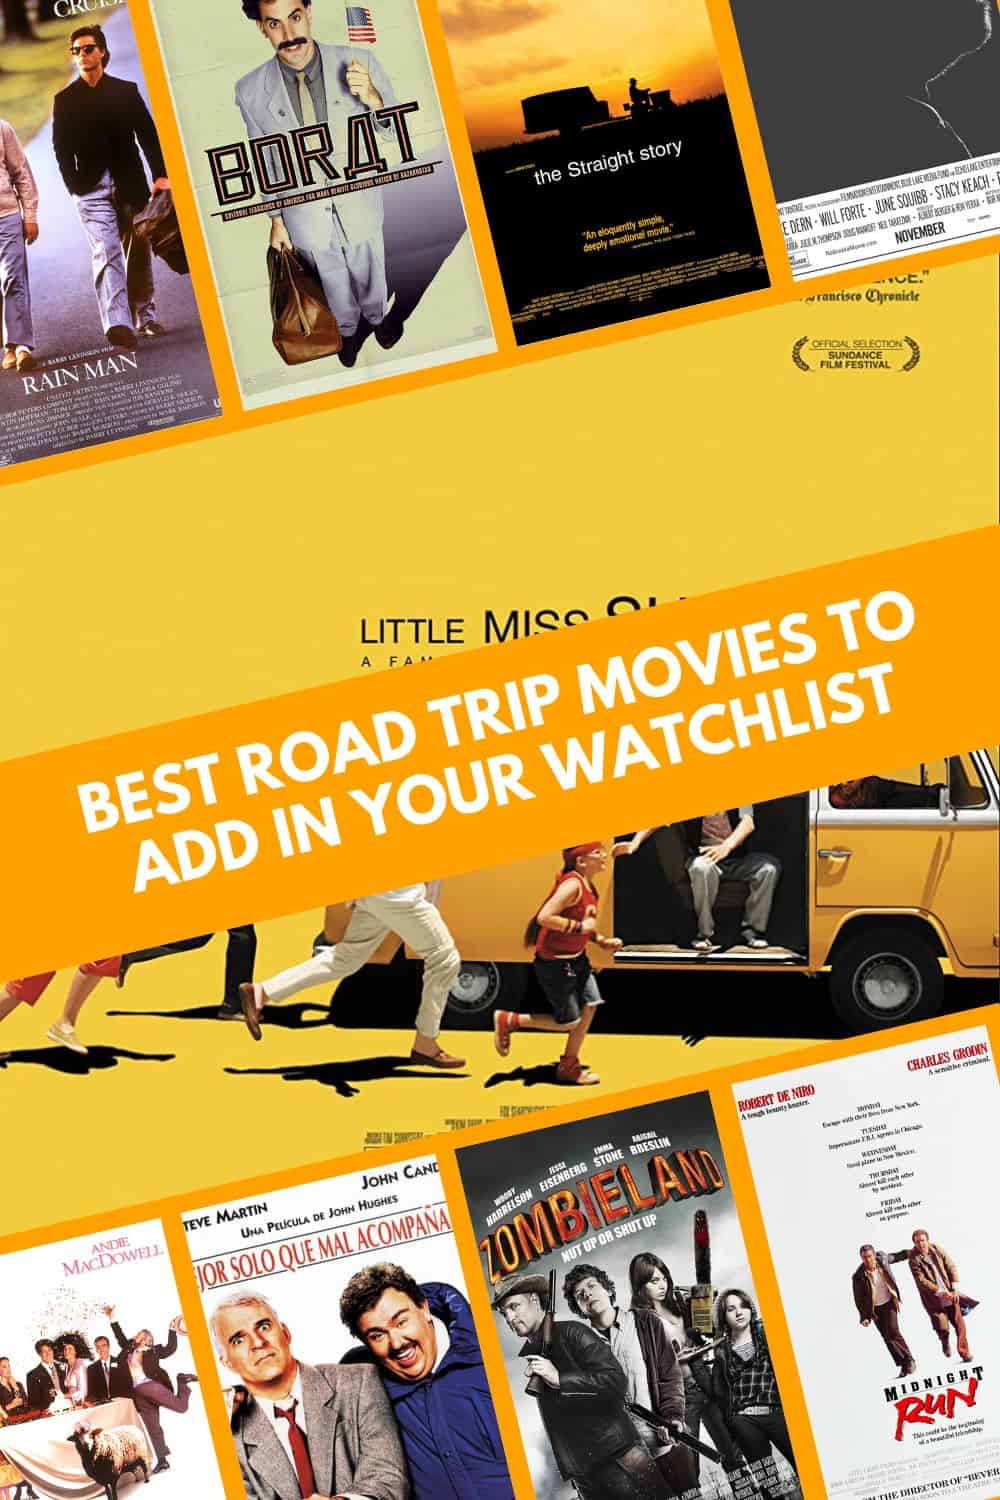 Road Trip Movies to Add in Your Watchlist